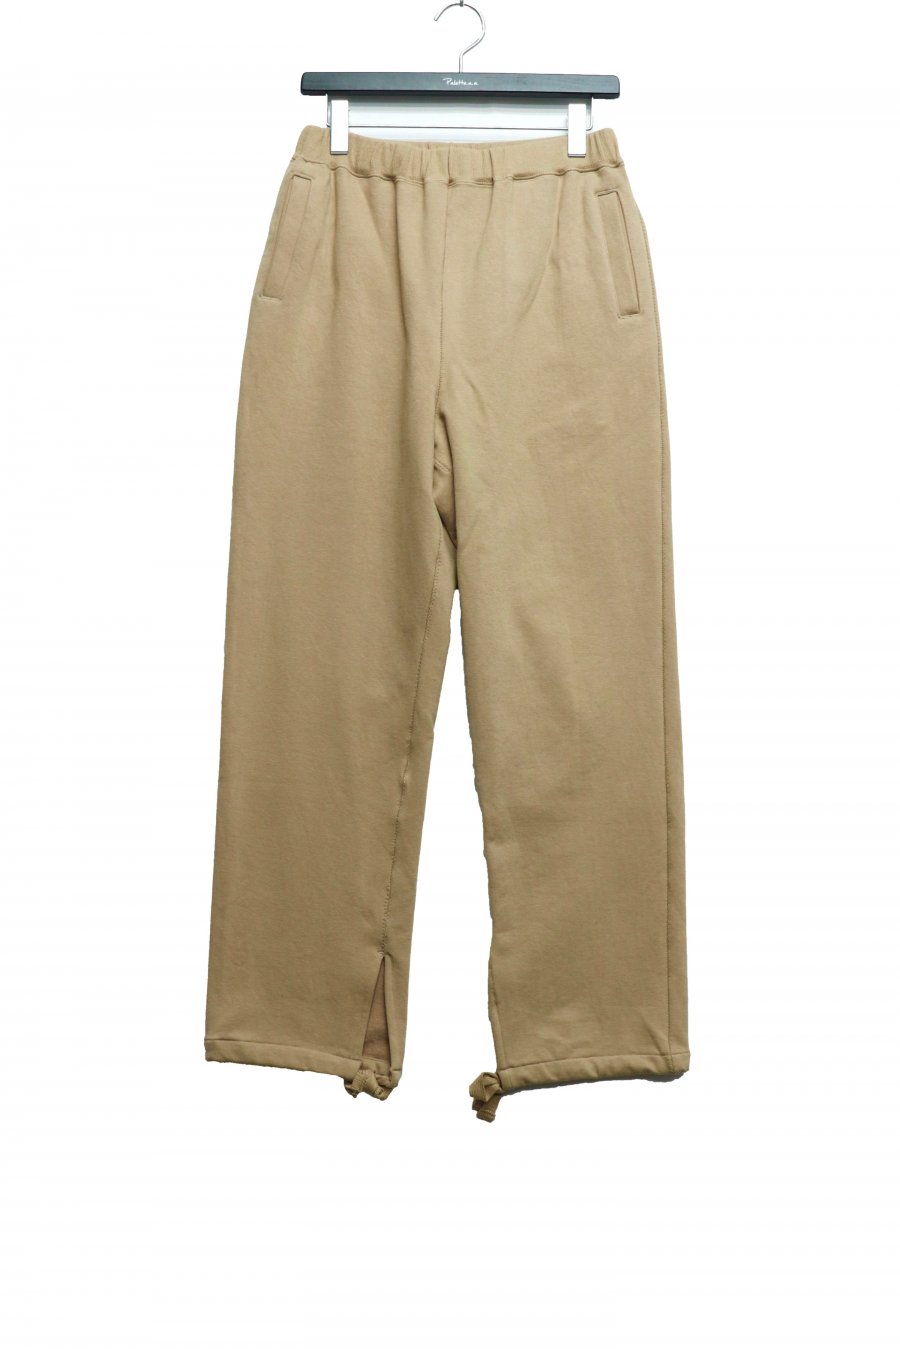 30%OFFKIIT  SUPIMA COTTON STRETCH PILE ZIGZAG STITCH RELAX PANTSBEIGE<img class='new_mark_img2' src='https://img.shop-pro.jp/img/new/icons20.gif' style='border:none;display:inline;margin:0px;padding:0px;width:auto;' />